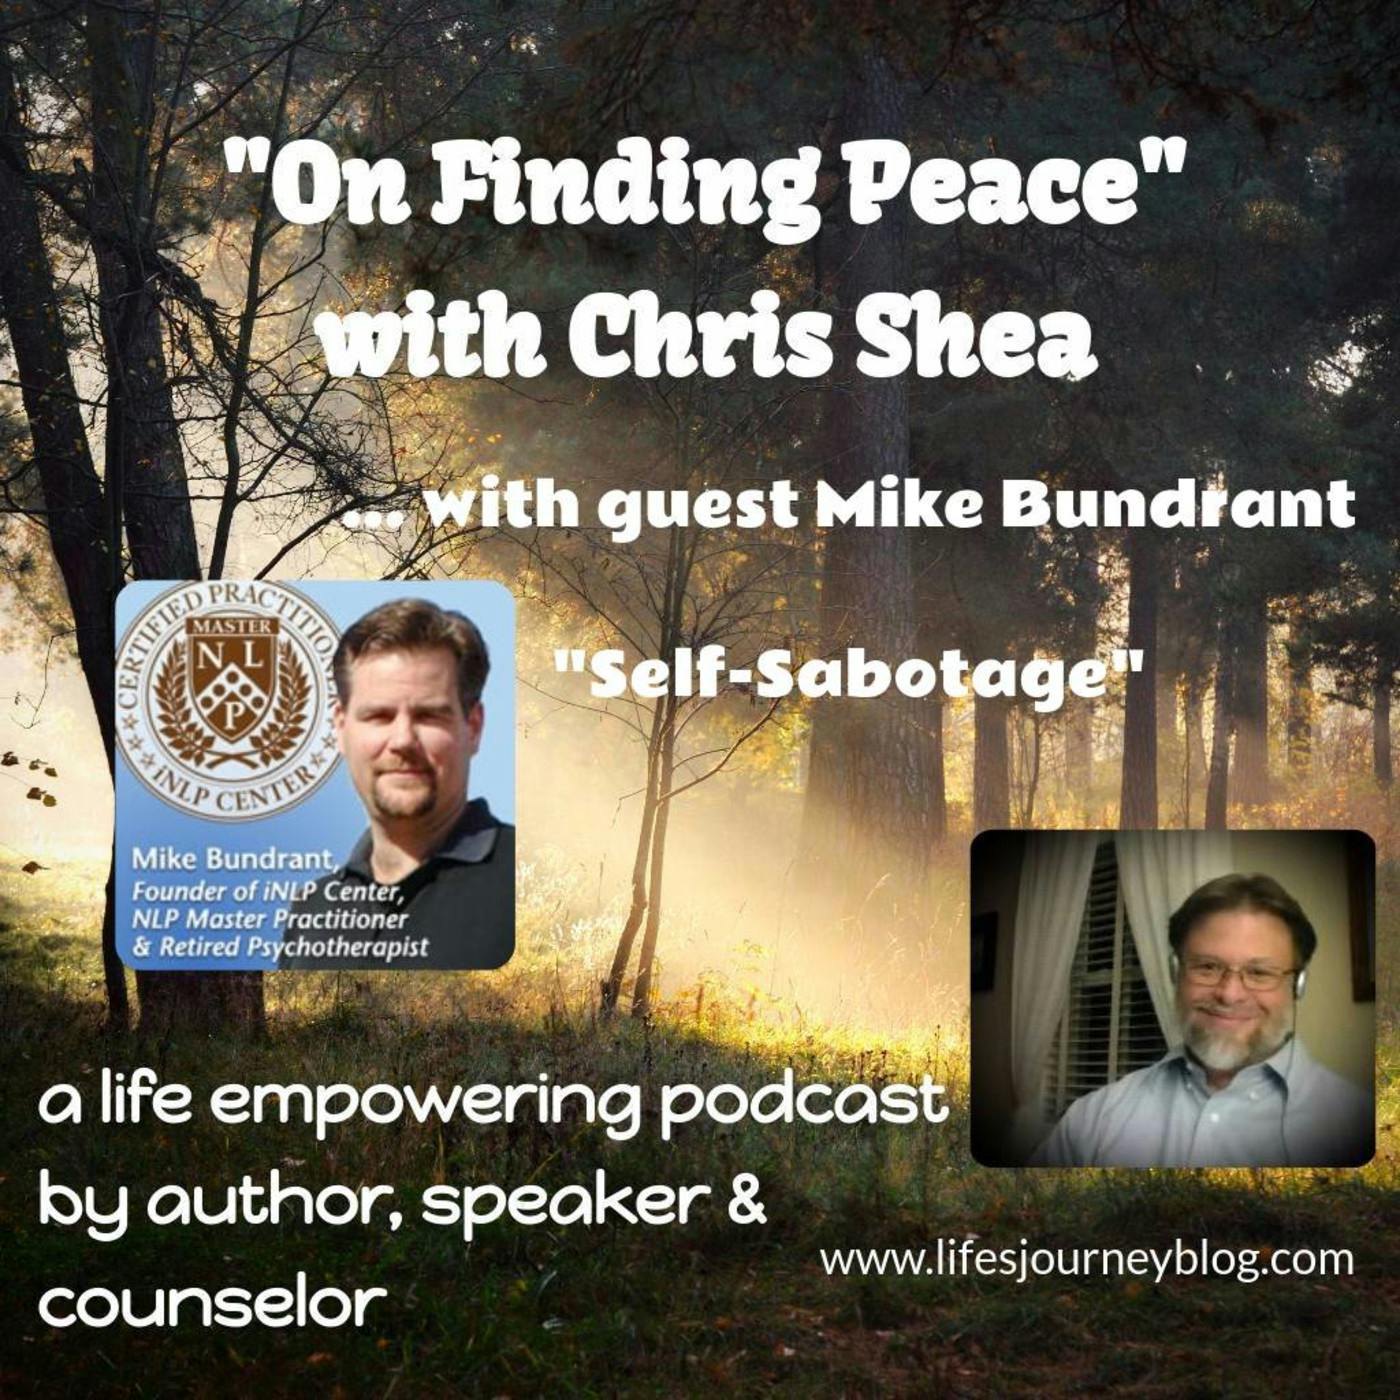 Self-Sabotage: Why We Do It An Interview With Mike Bundrant